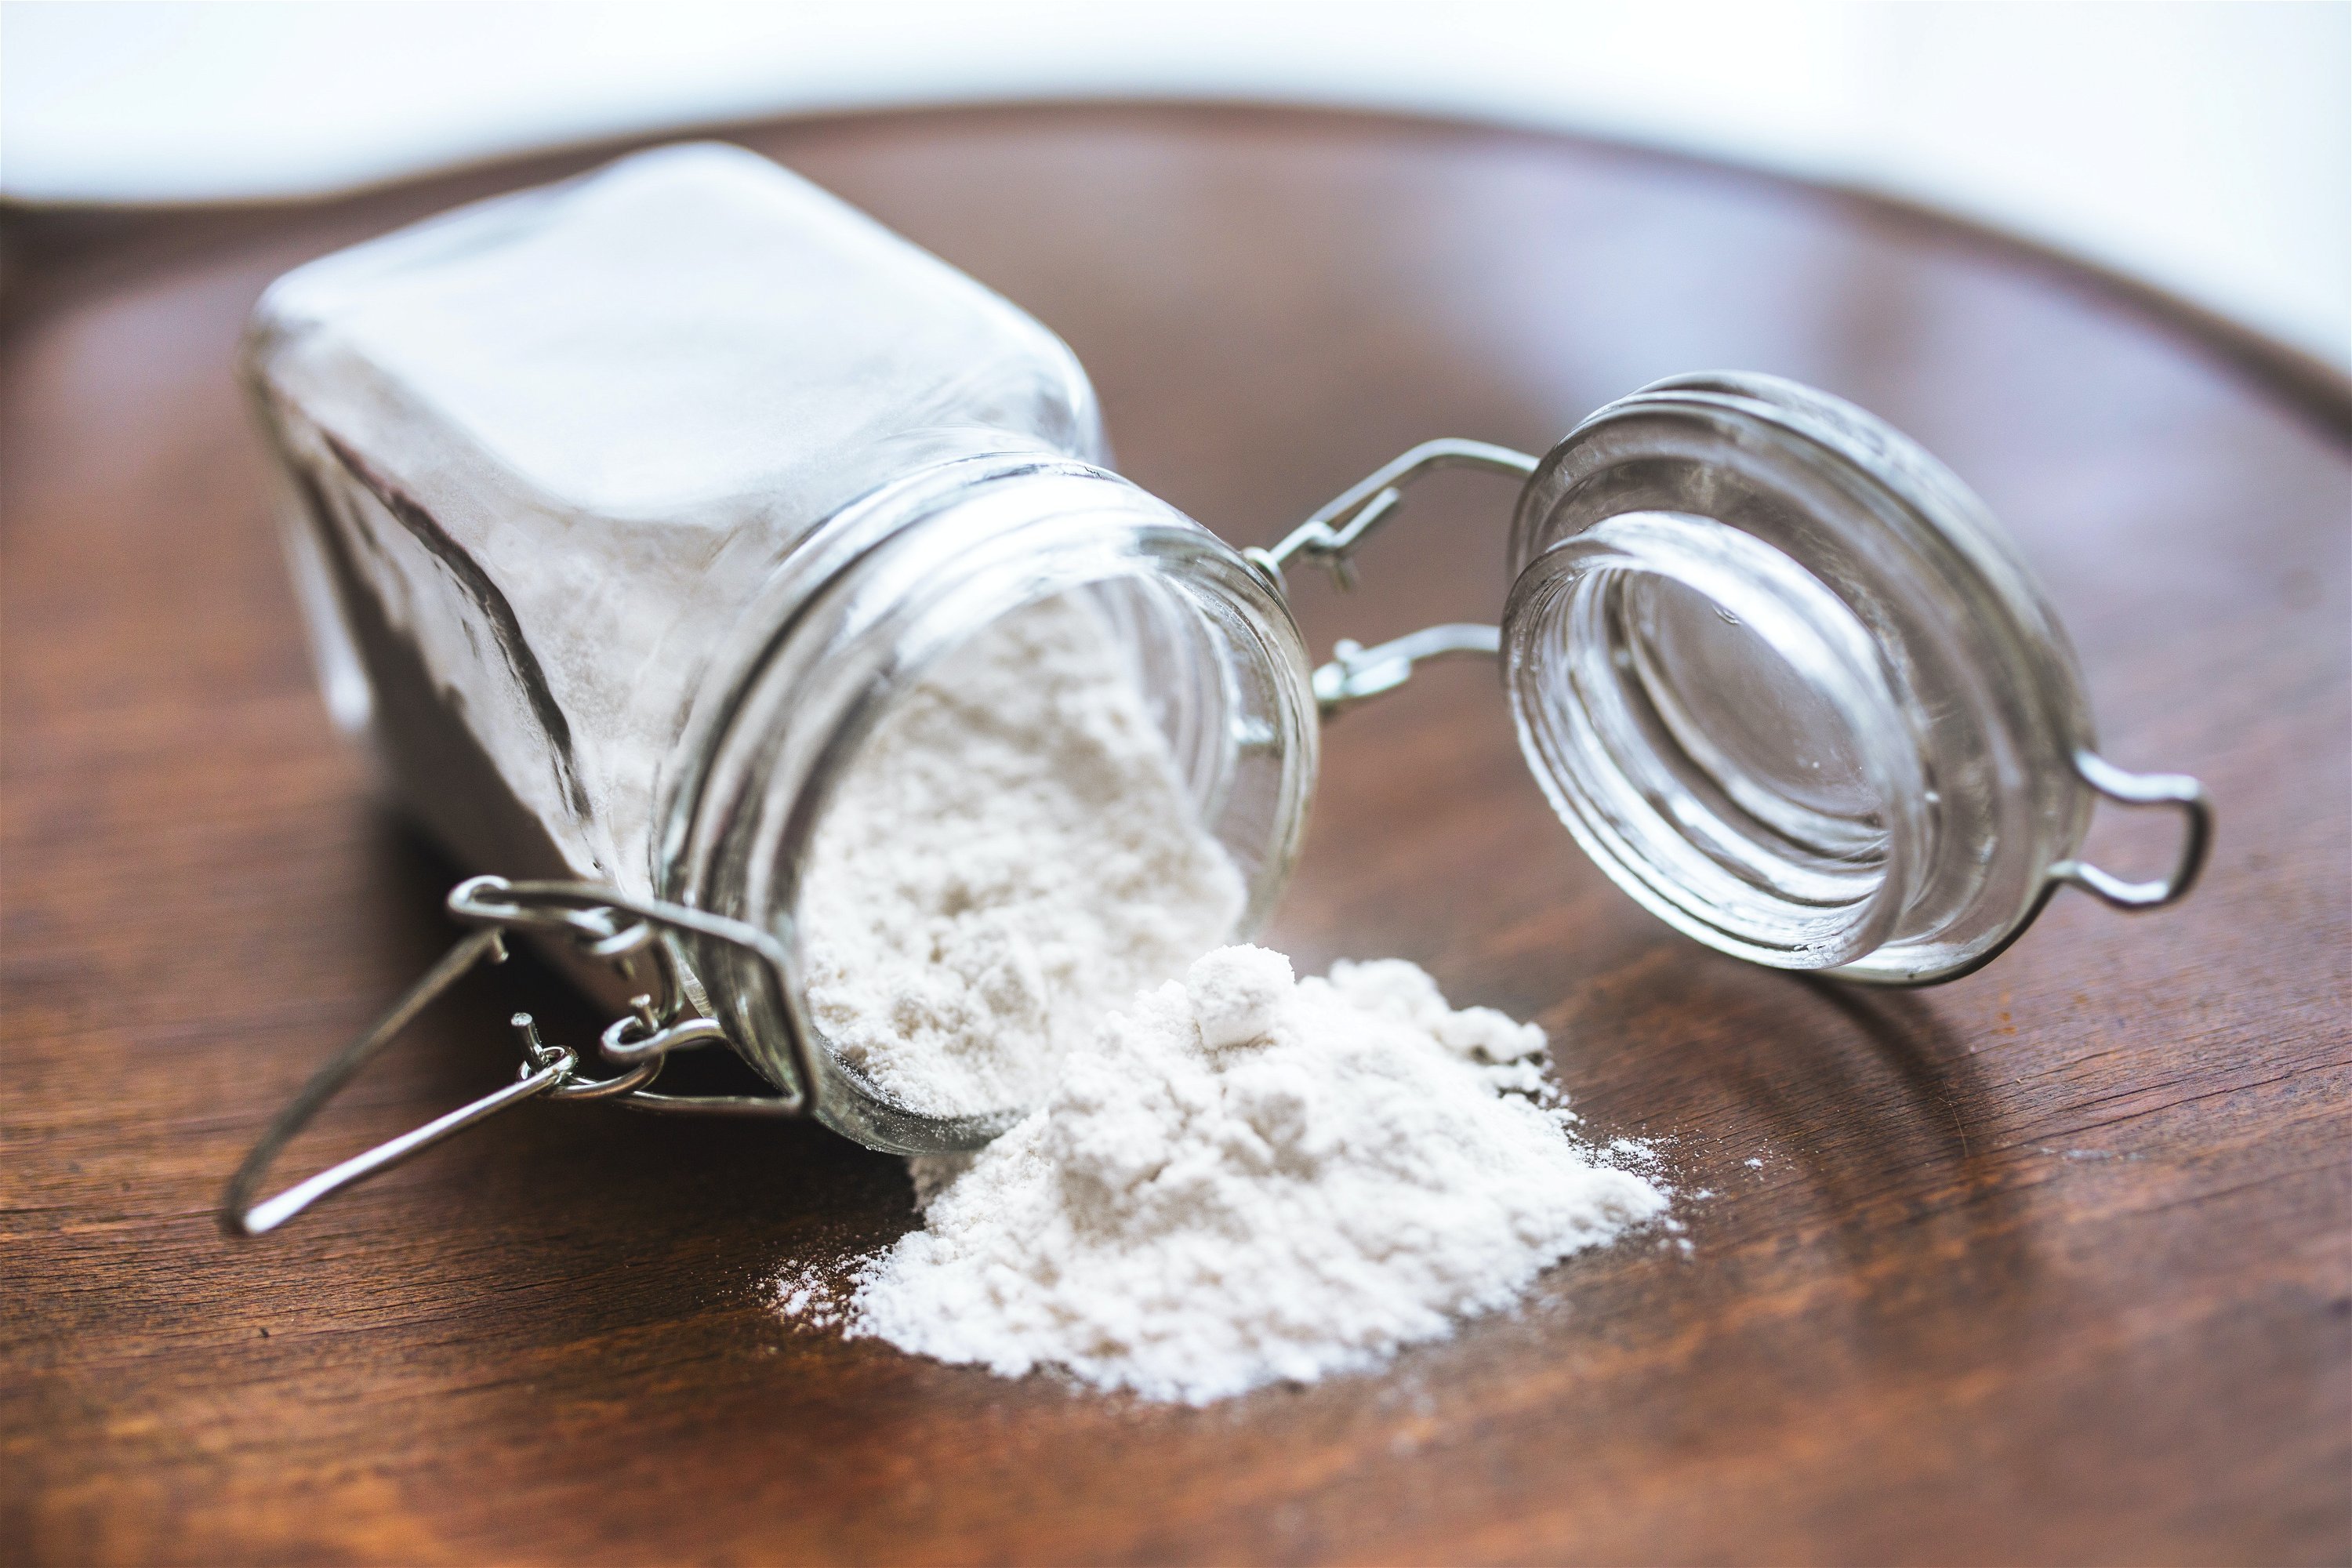 Baking bread: What are the types of flour?